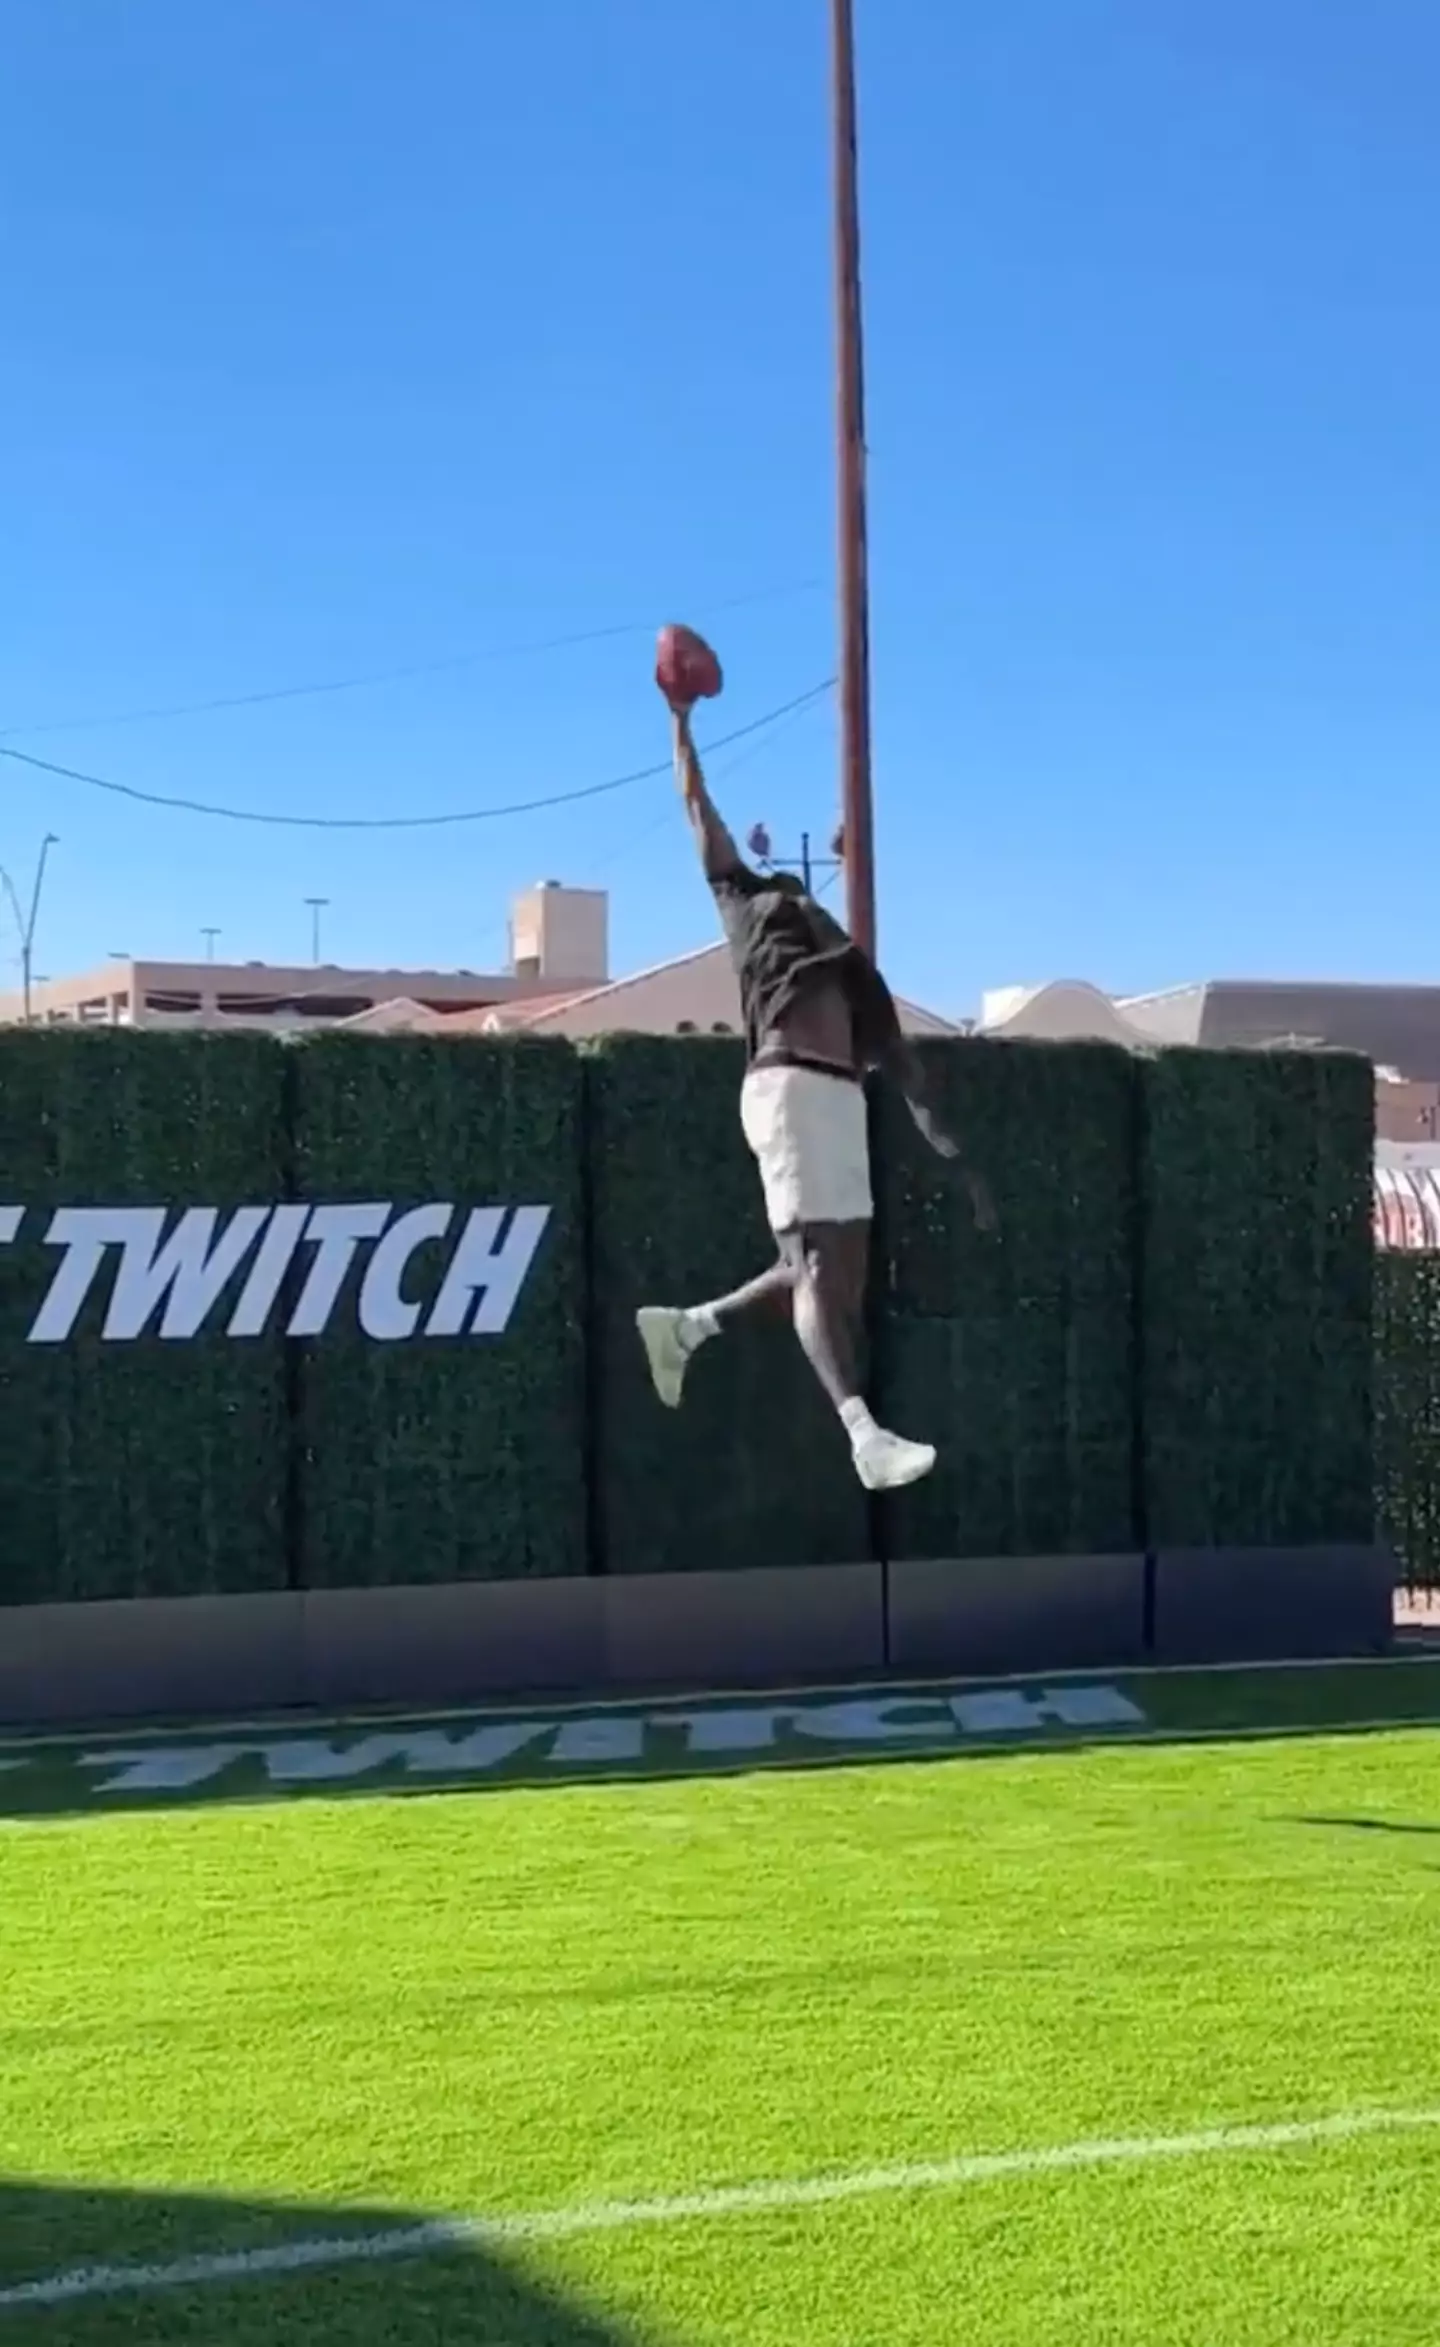 Seriously, how is DK Metcalf getting up there?